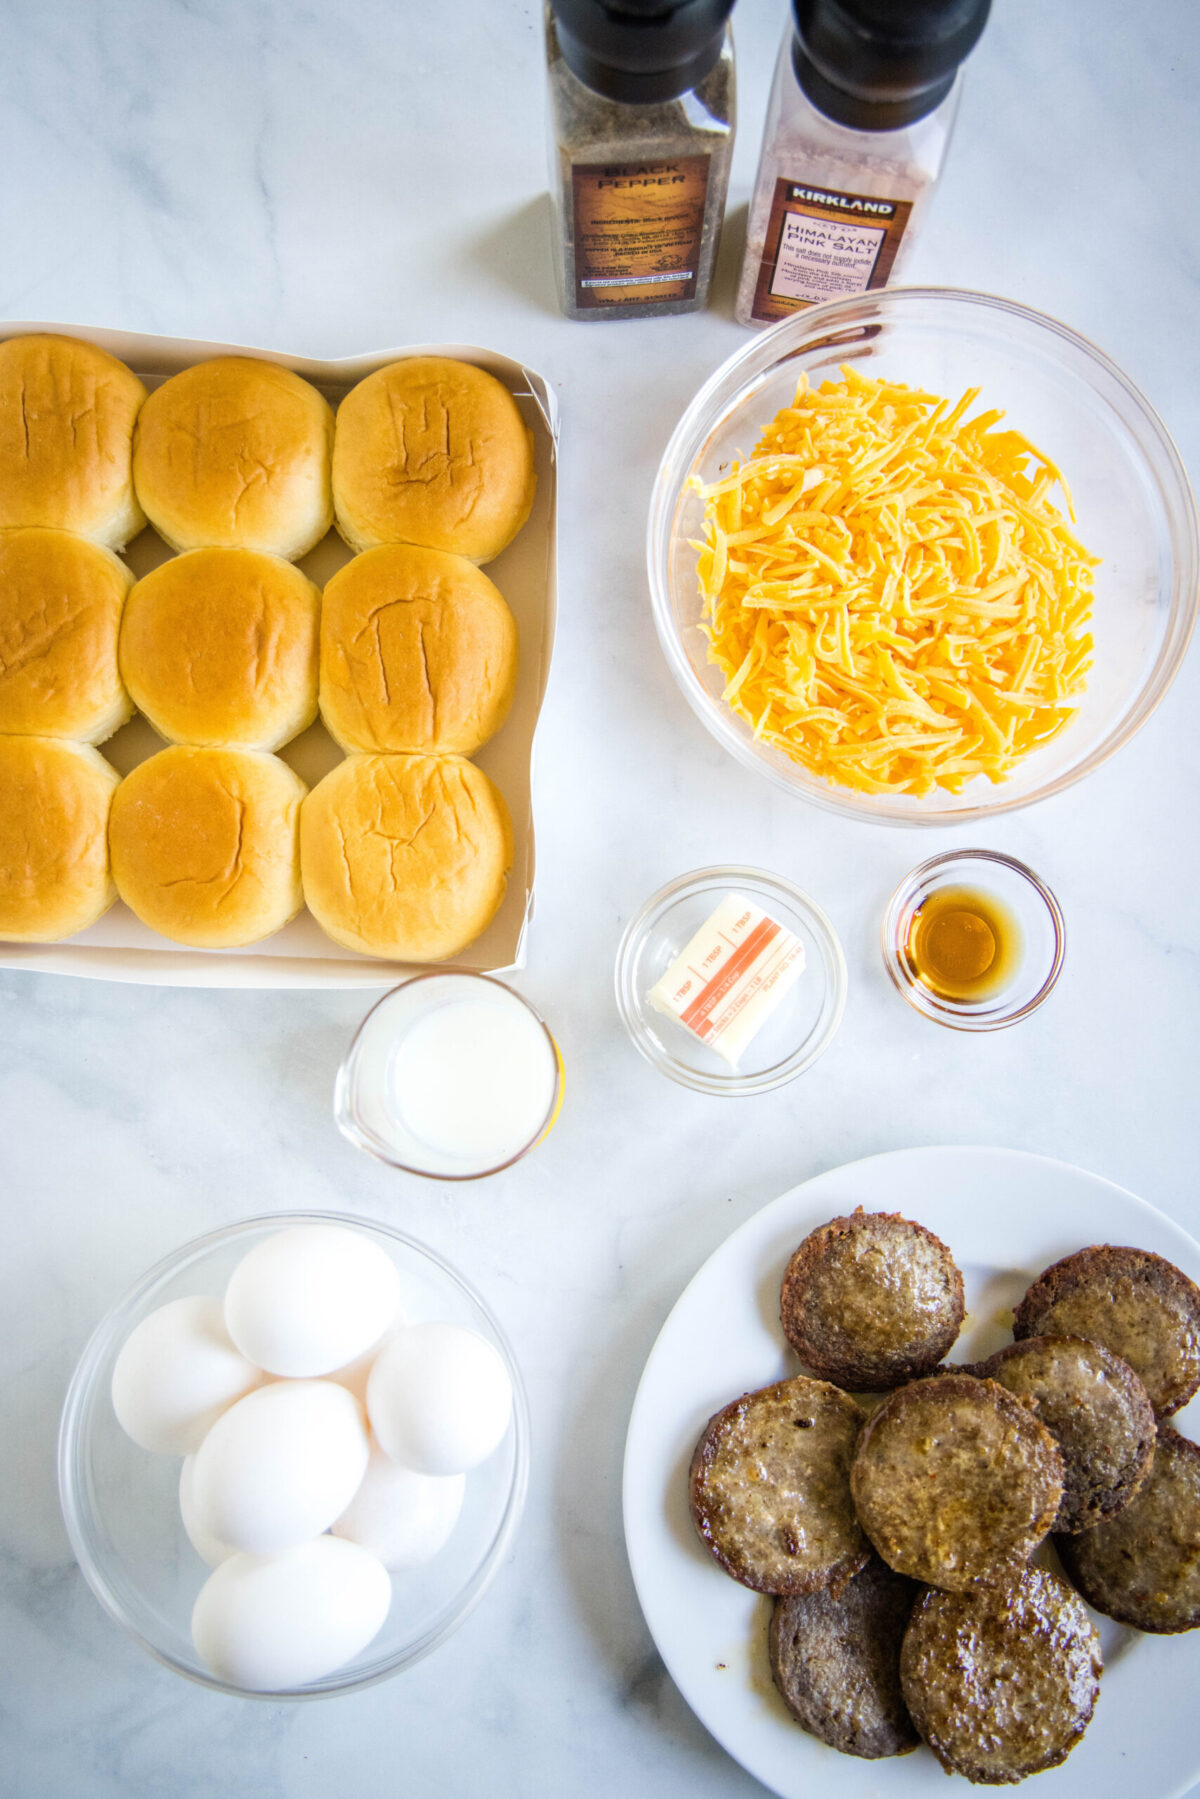 Overhead view of the ingredients needed for breakfast sliders: a pack of slider buns, a plate of sausages, a bowl of eggs, a bowl of shredded cheese, a bowl of milk, a bowl of maple syrup, some butter, and salt and pepper grinders